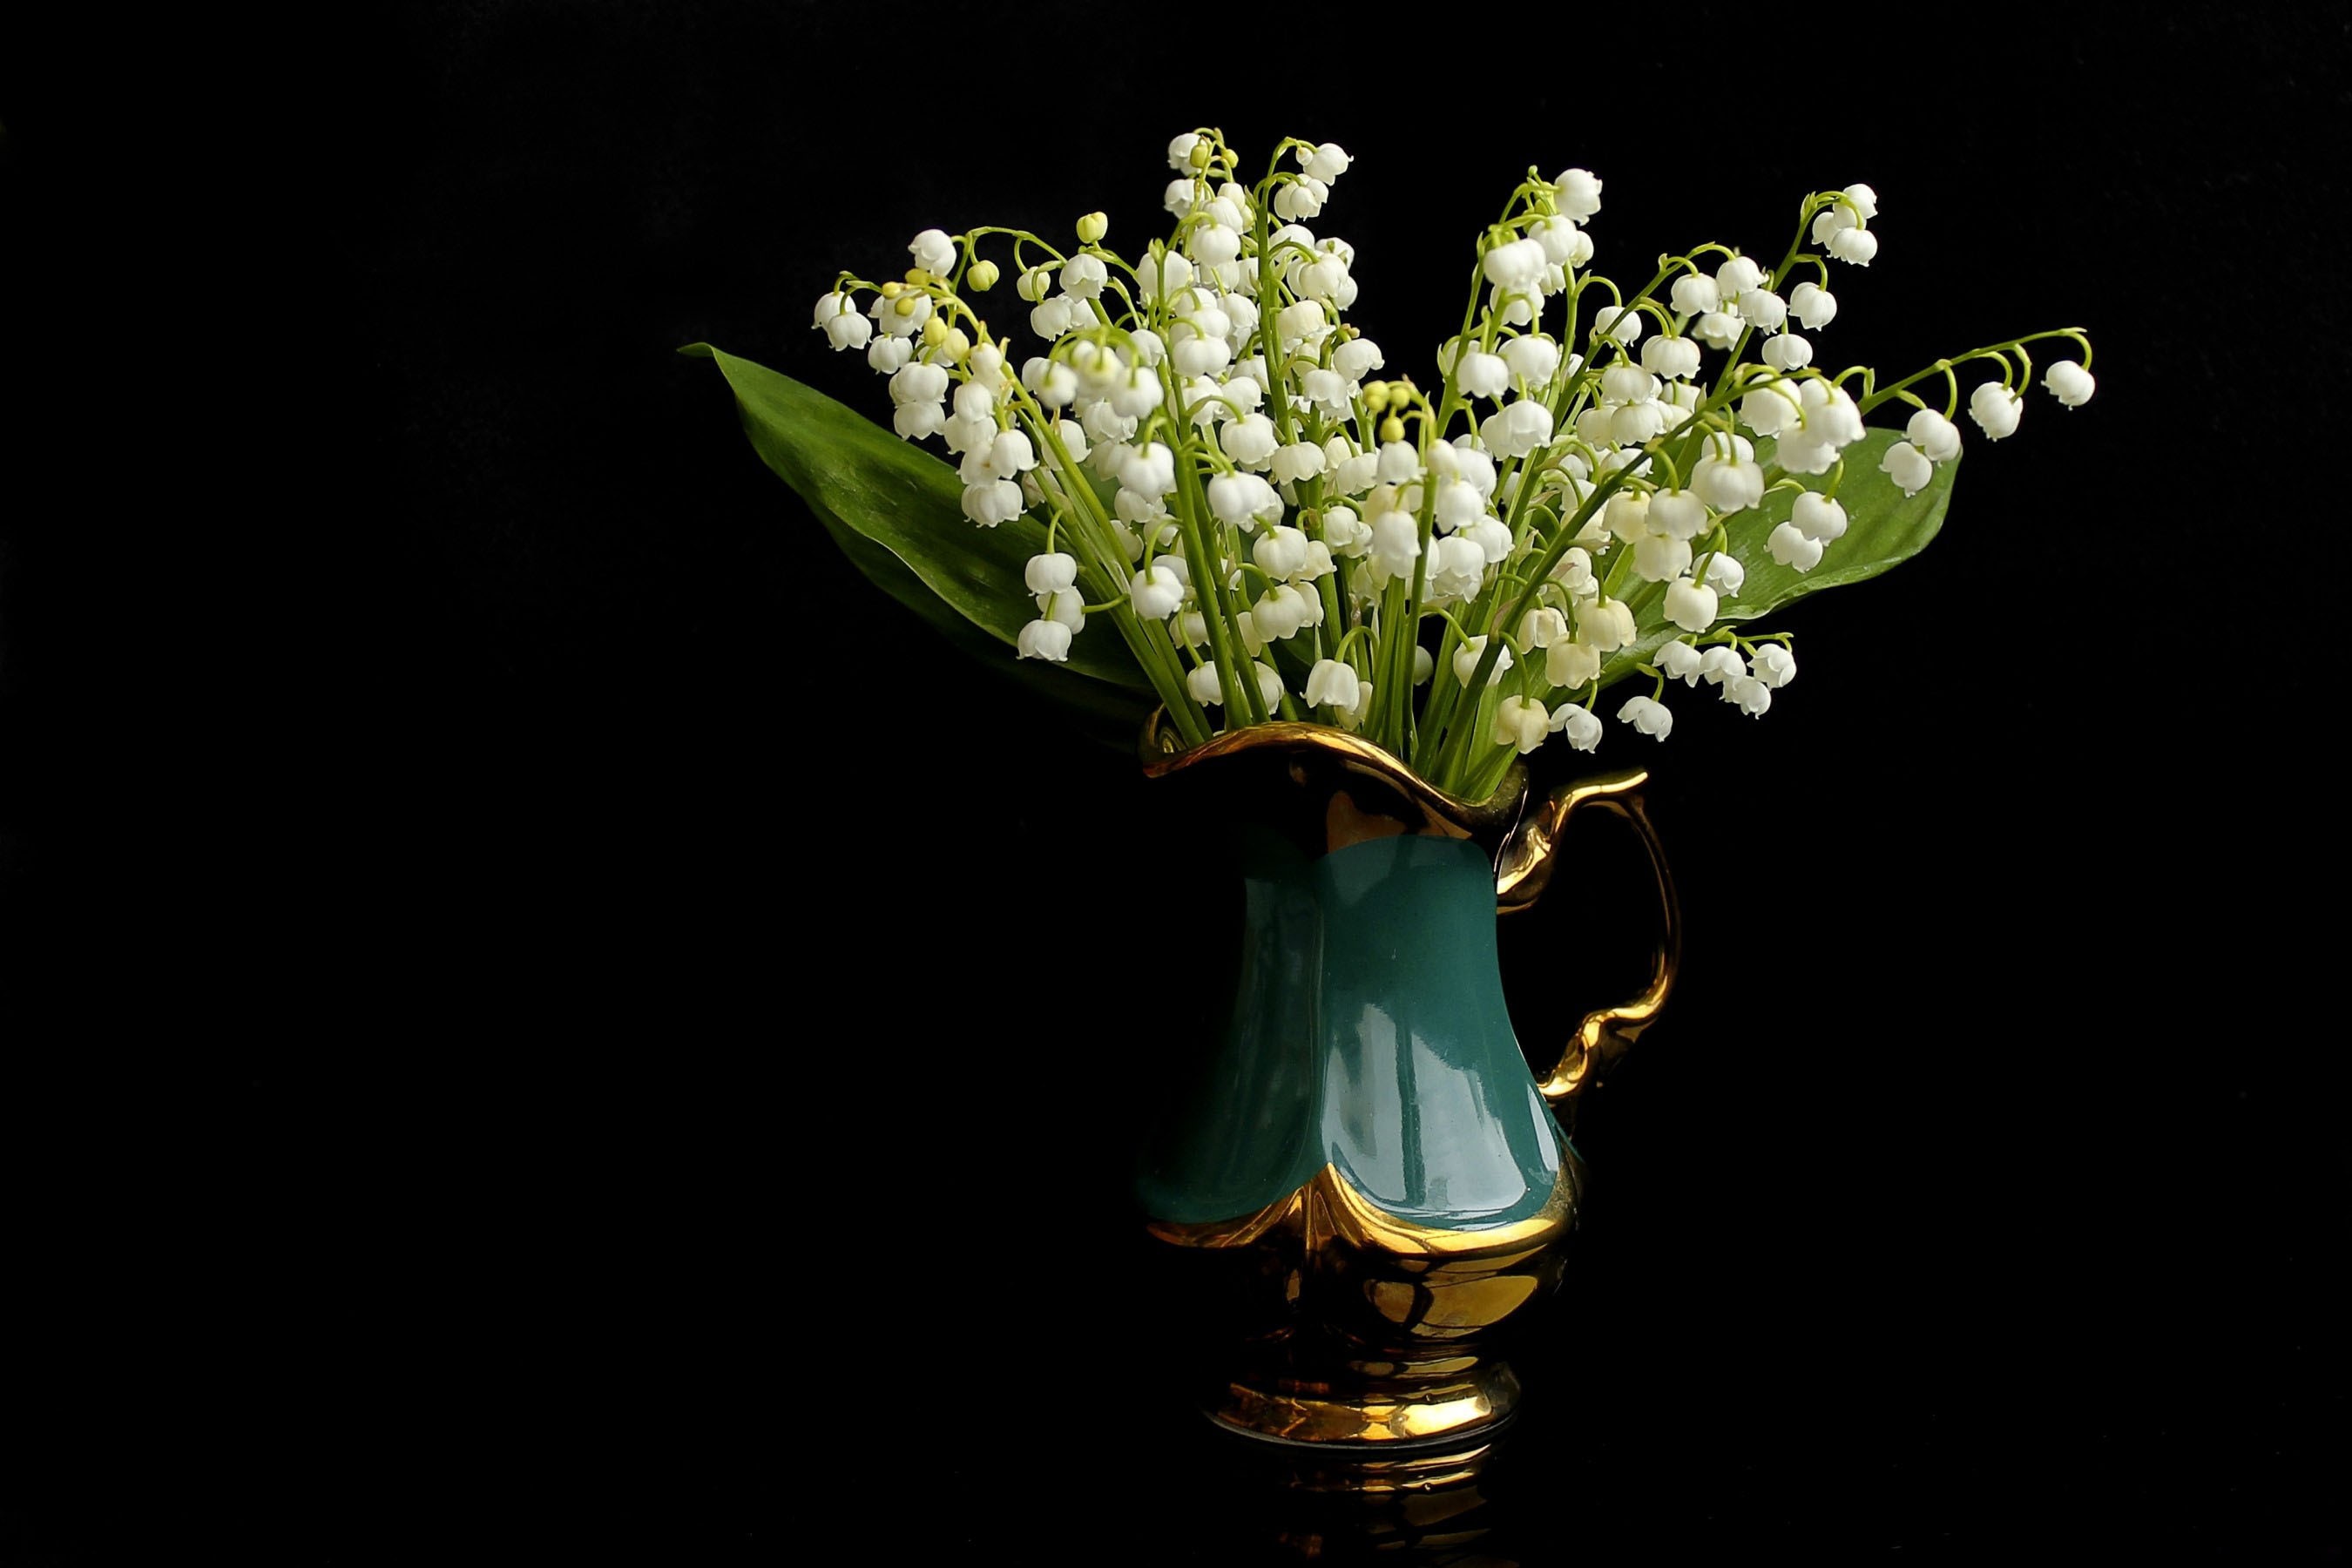 Flower Lily Of The Valley Pitcher White Flower 2700x1800